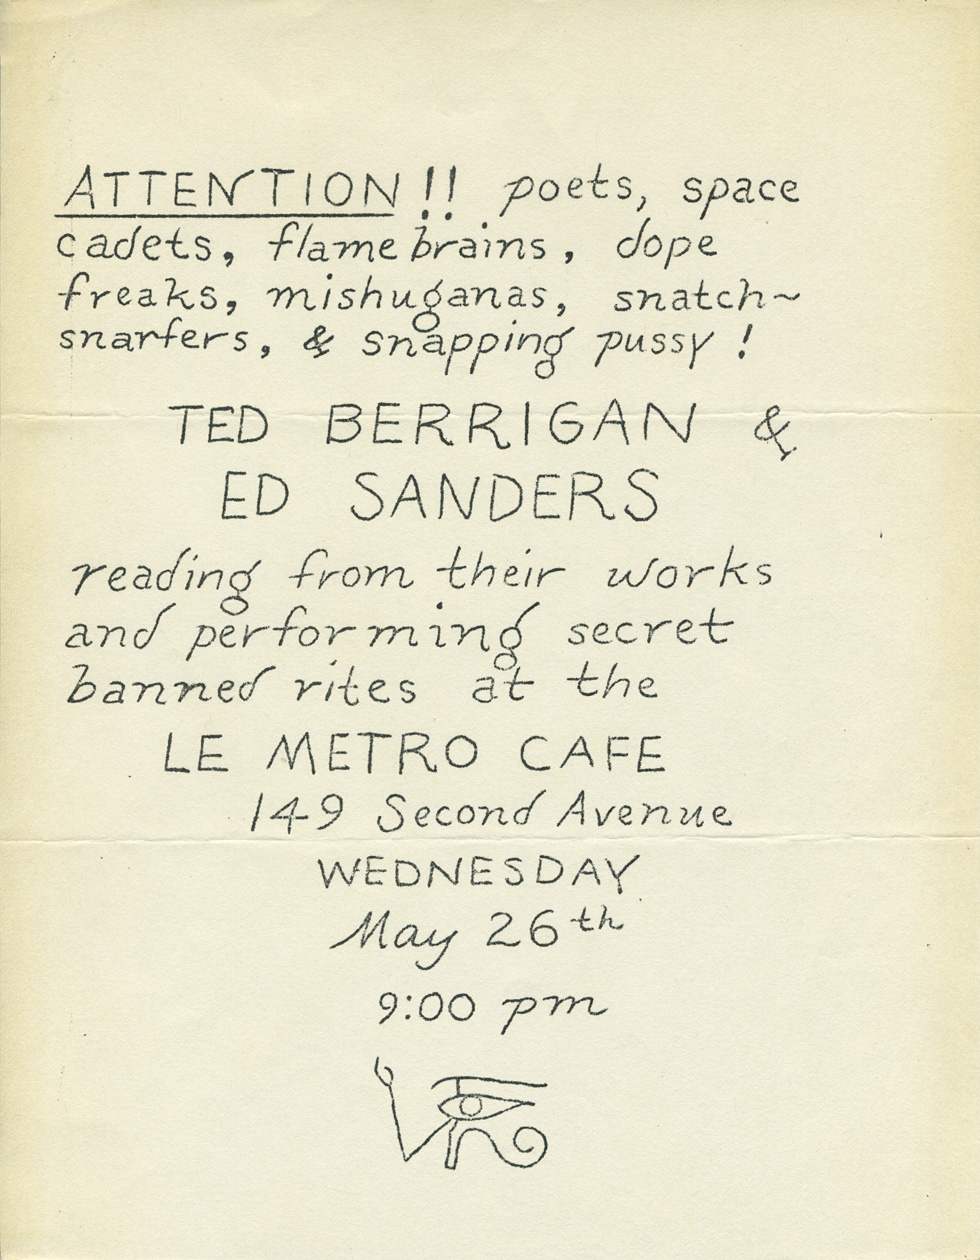 “Attention!! poets, space cadets, flame brains, dope freaks, mishuganas, dope snarfers, & snapping pussy! Ted Berrigan & Ed Sanders reading from their works and performing secret banned rites at the Le Metro Cafe,” New York City, May 26th, 1965. Artwork by Ed Sanders. 8 1/2 x 11 inches.